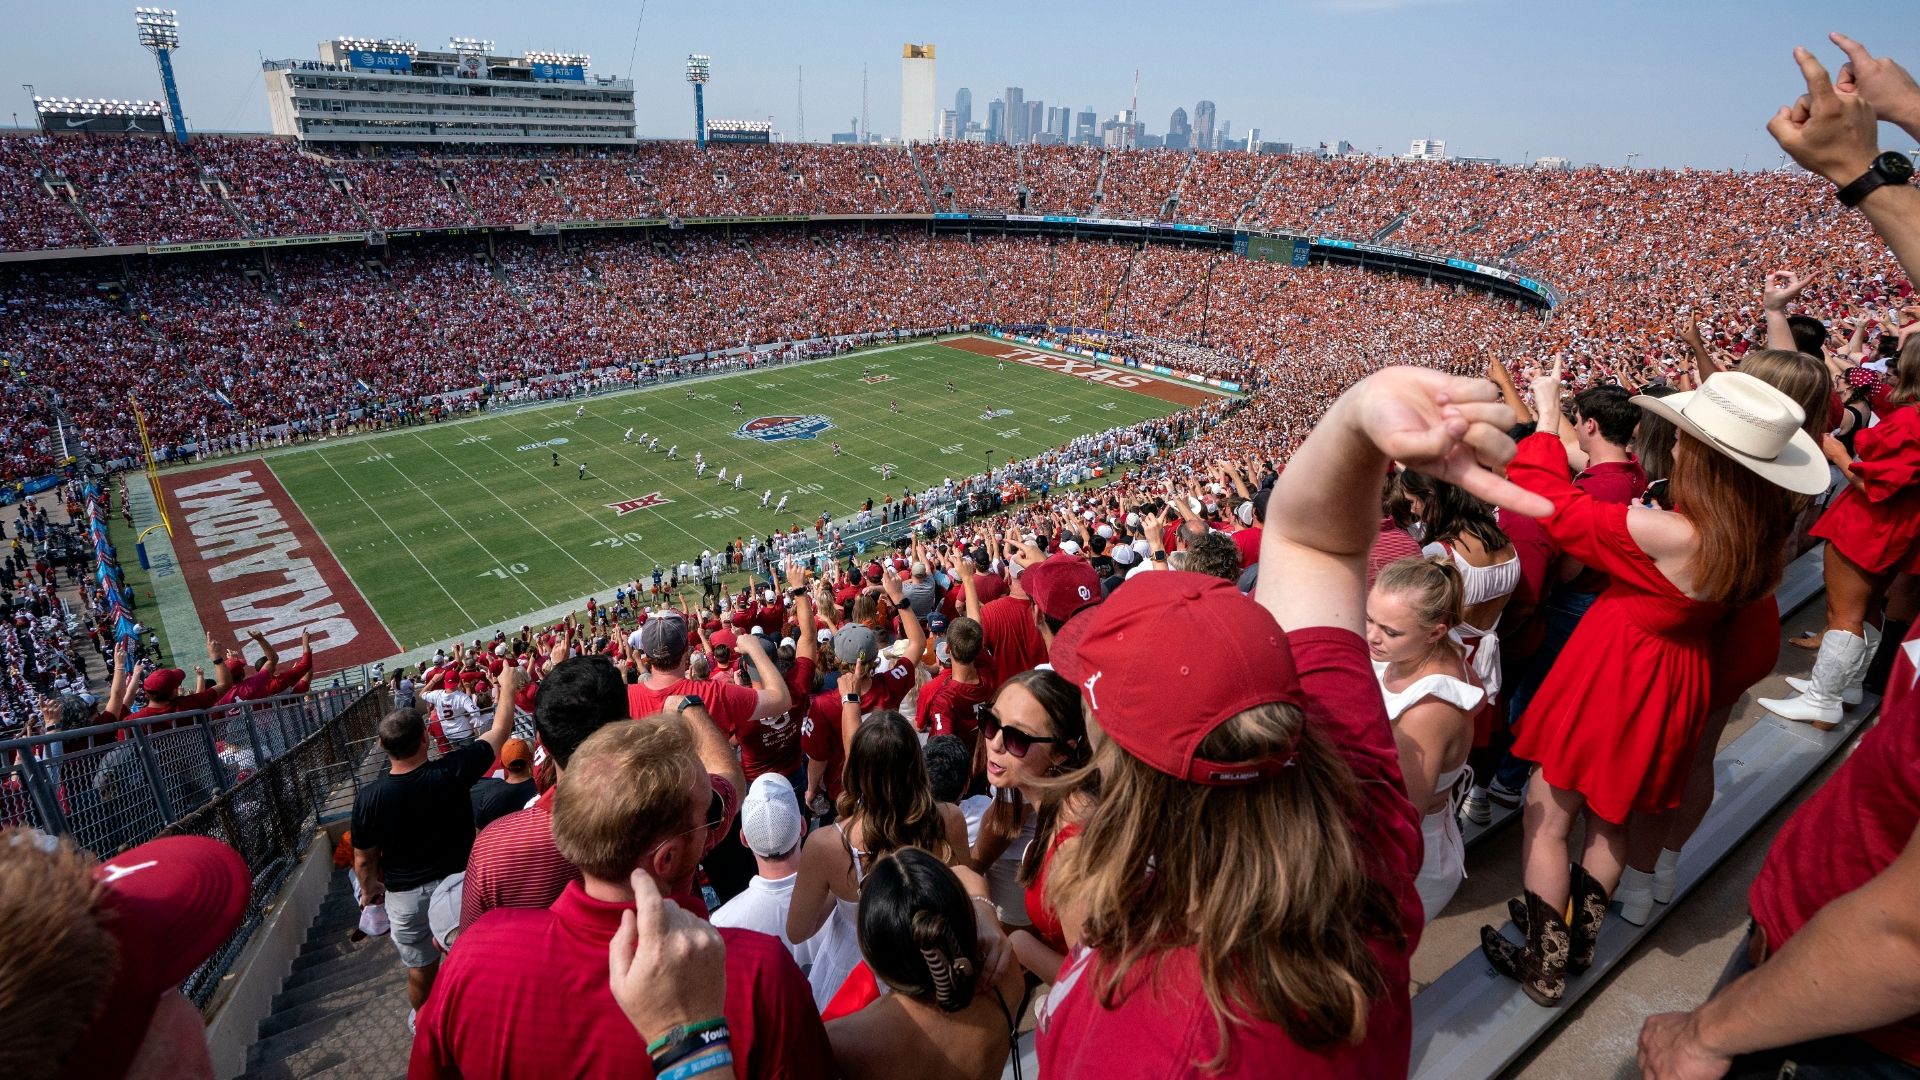 Texas, Oklahoma expansion brings special culture to SEC